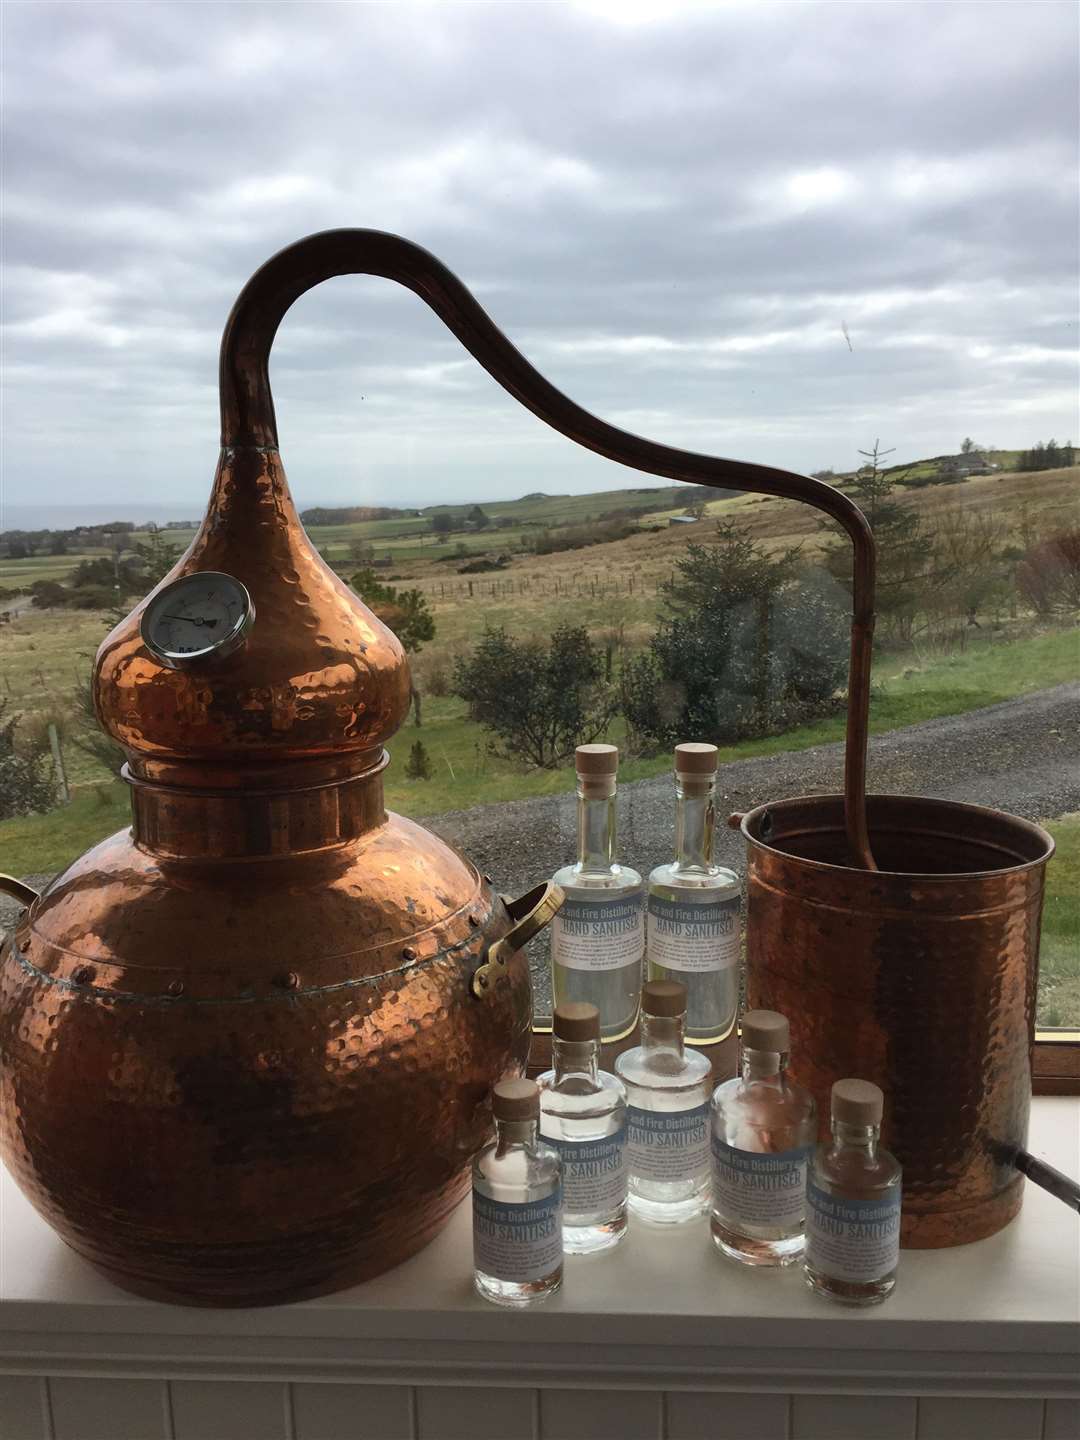 Ice and Fire Distillery at Latheronwheel has changed its normal operations to focus on creating hand sanitiser.